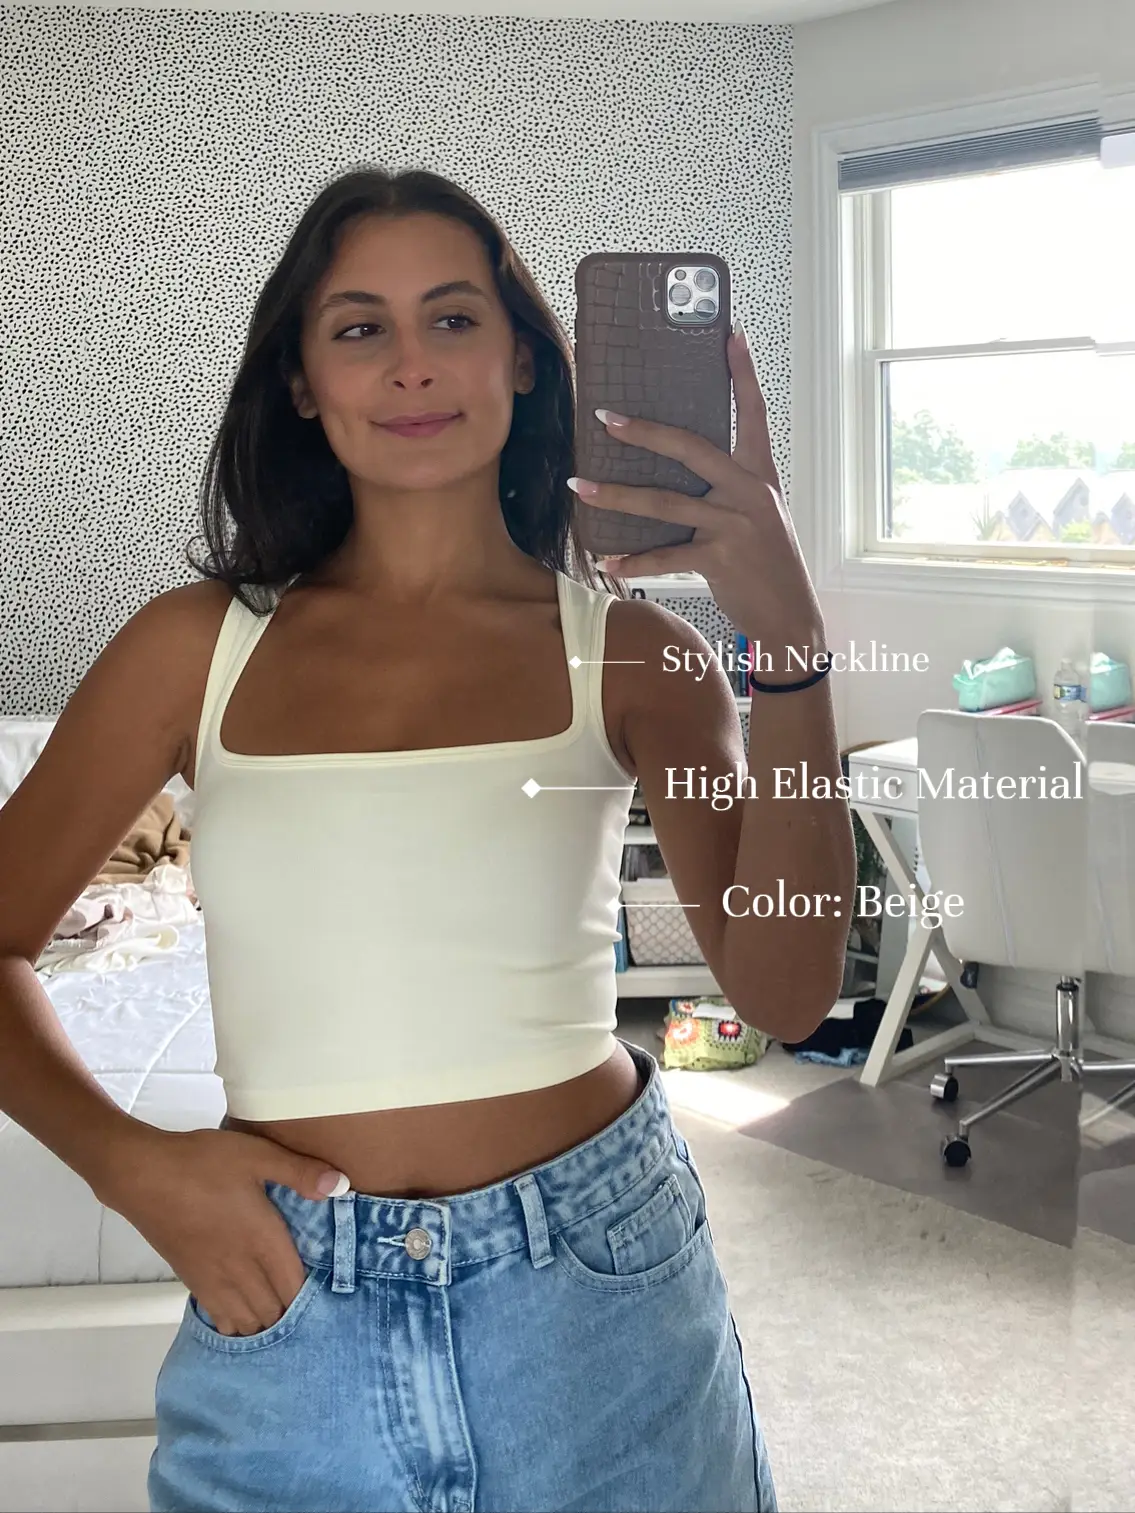 Commense Try-On Clothing Haul 🛍️, Gallery posted by BeingIsabella